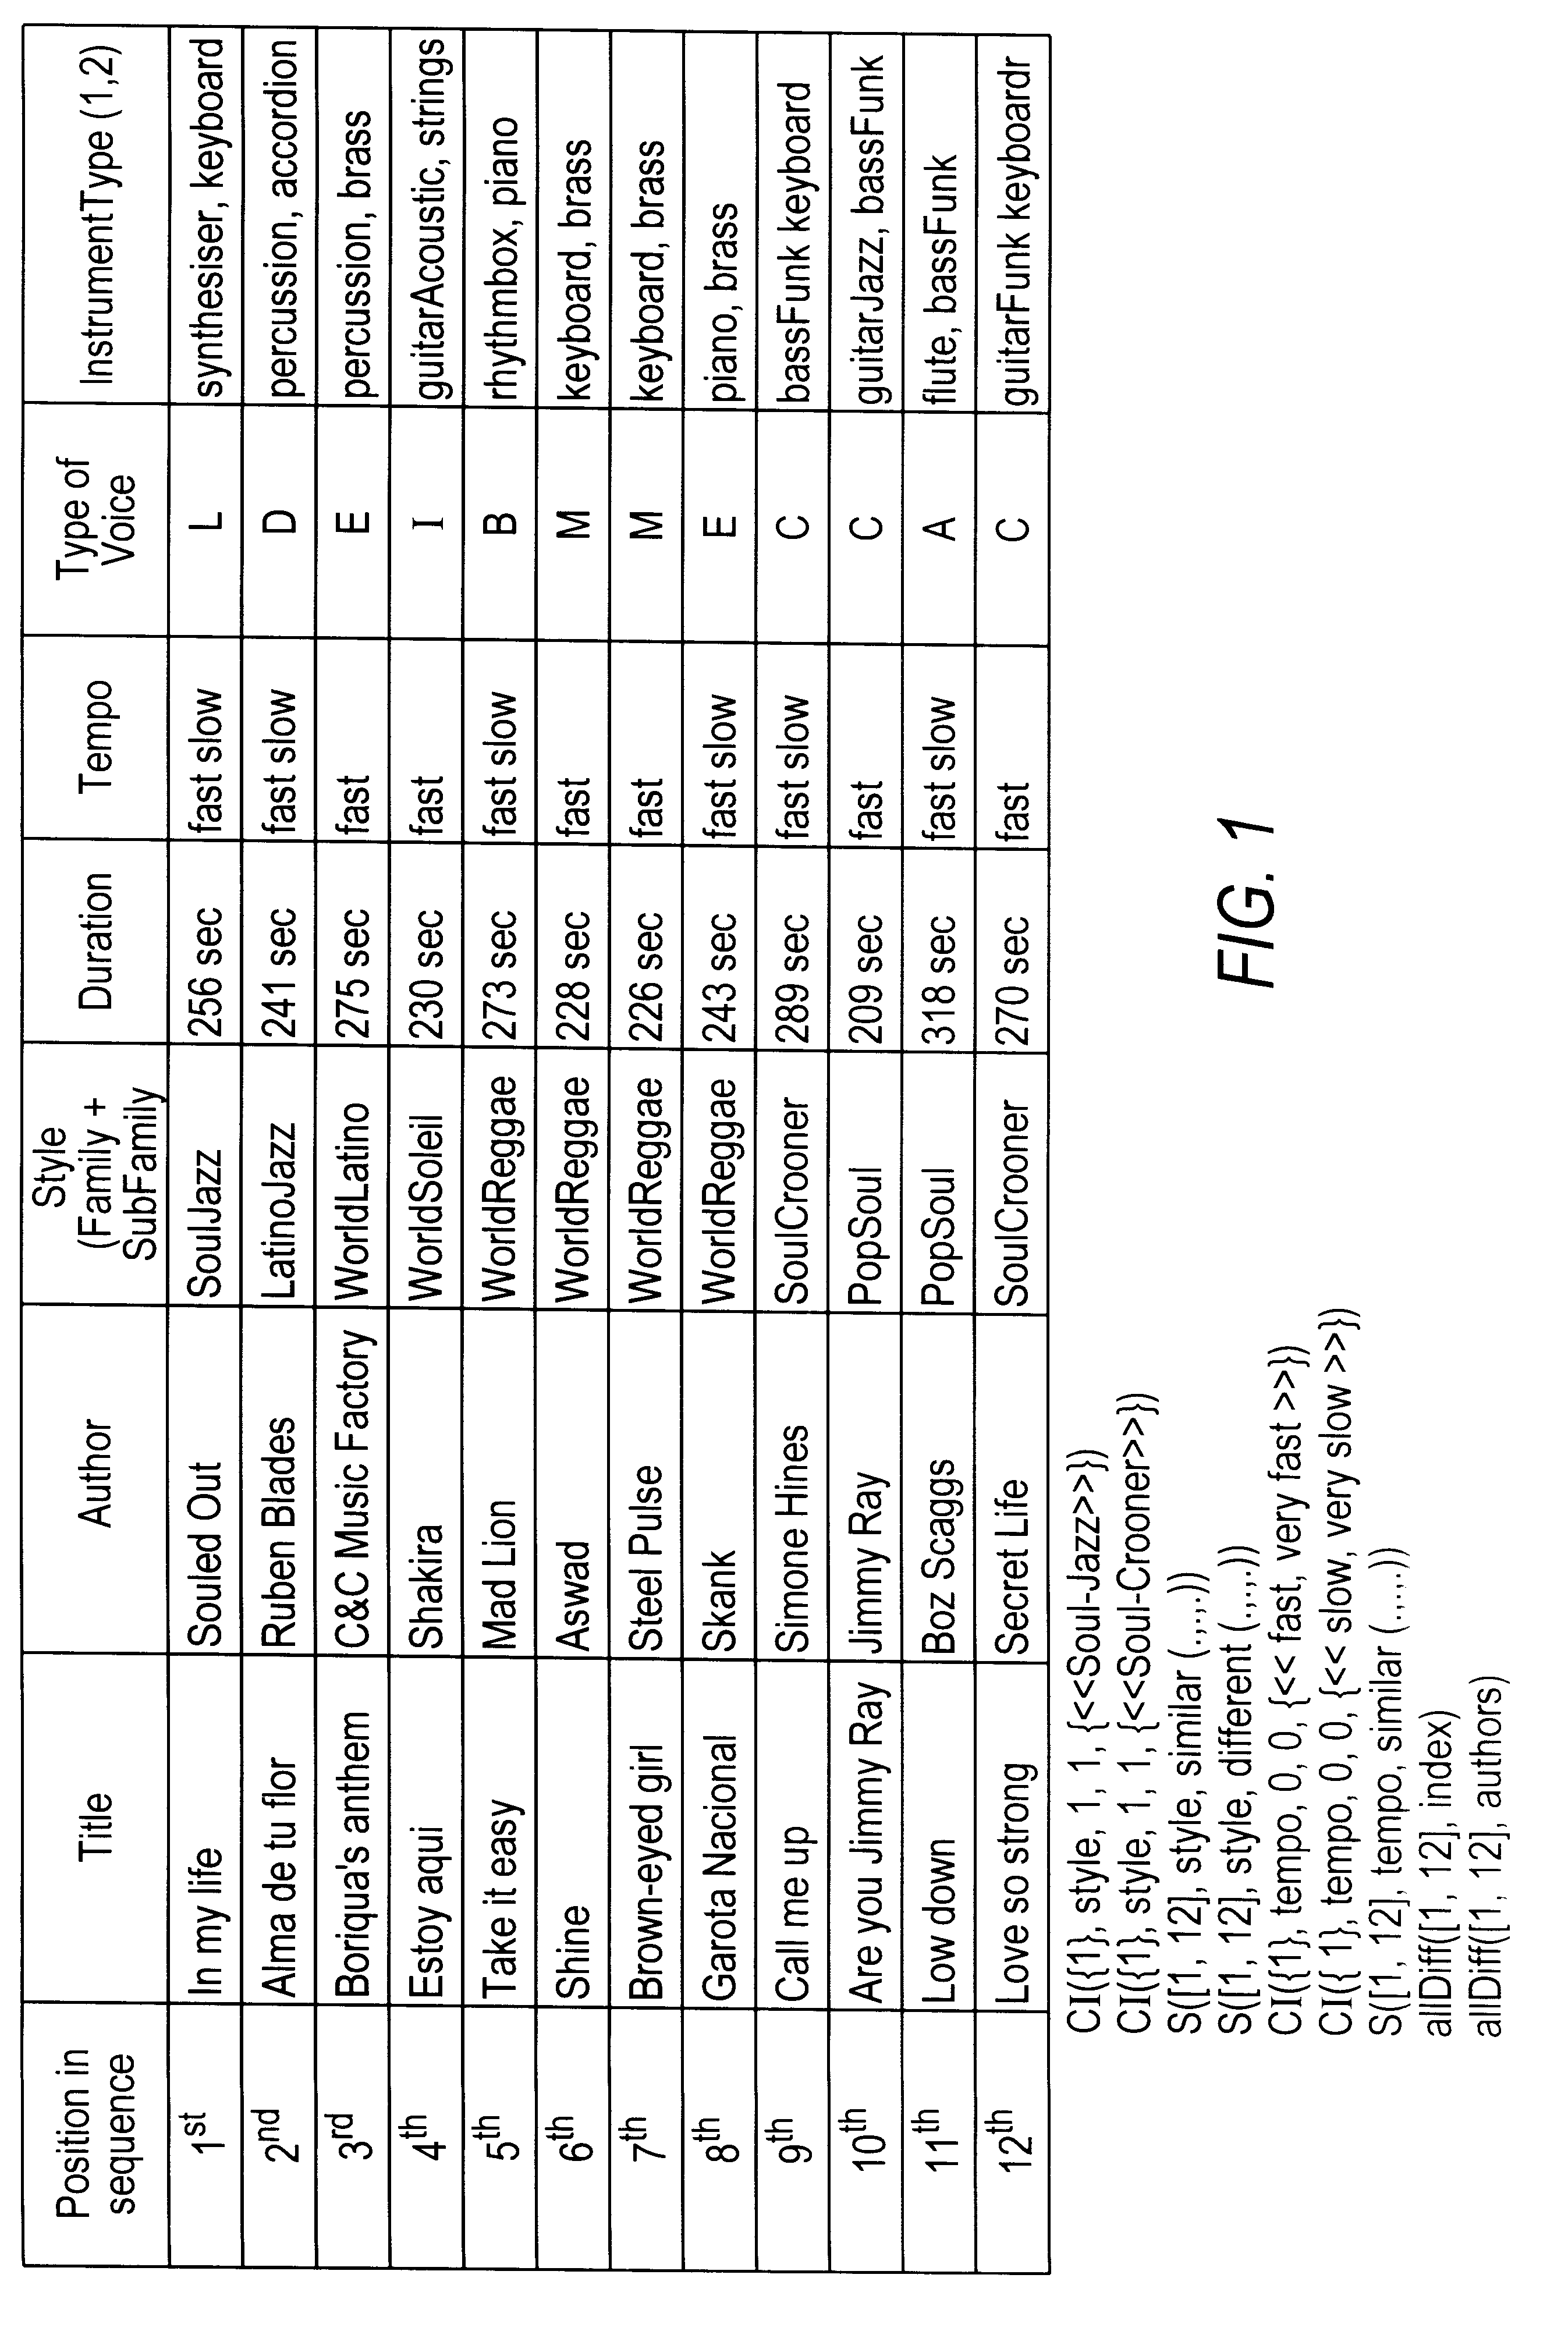 Sequence generation using a constraint satisfaction problem formulation